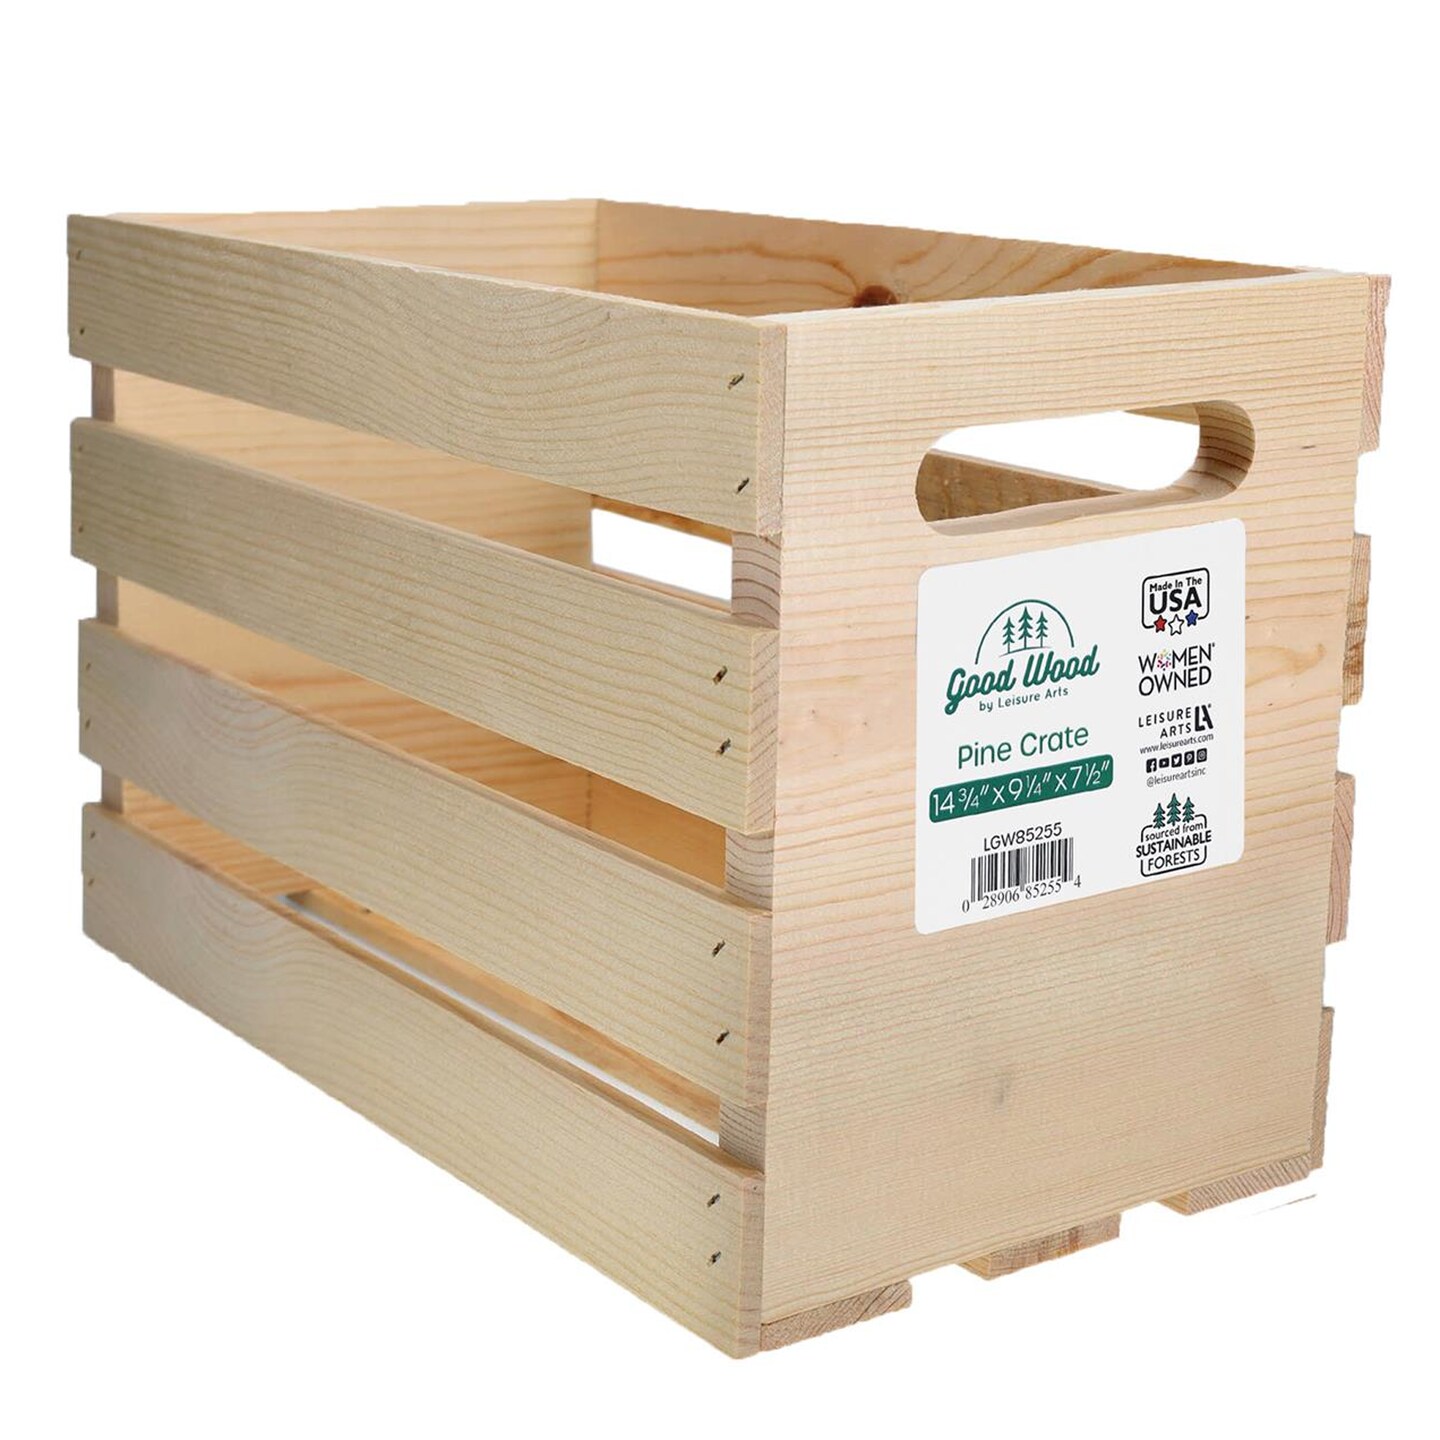 Good Wood by Leisure Arts Wooden Crate, wood crate unfinished,  wood crates for display, wood crates for storage, wooden crates unfinished,  Pine, 14.75&#x22;x 9.25&#x22; x 7.5&#x22;